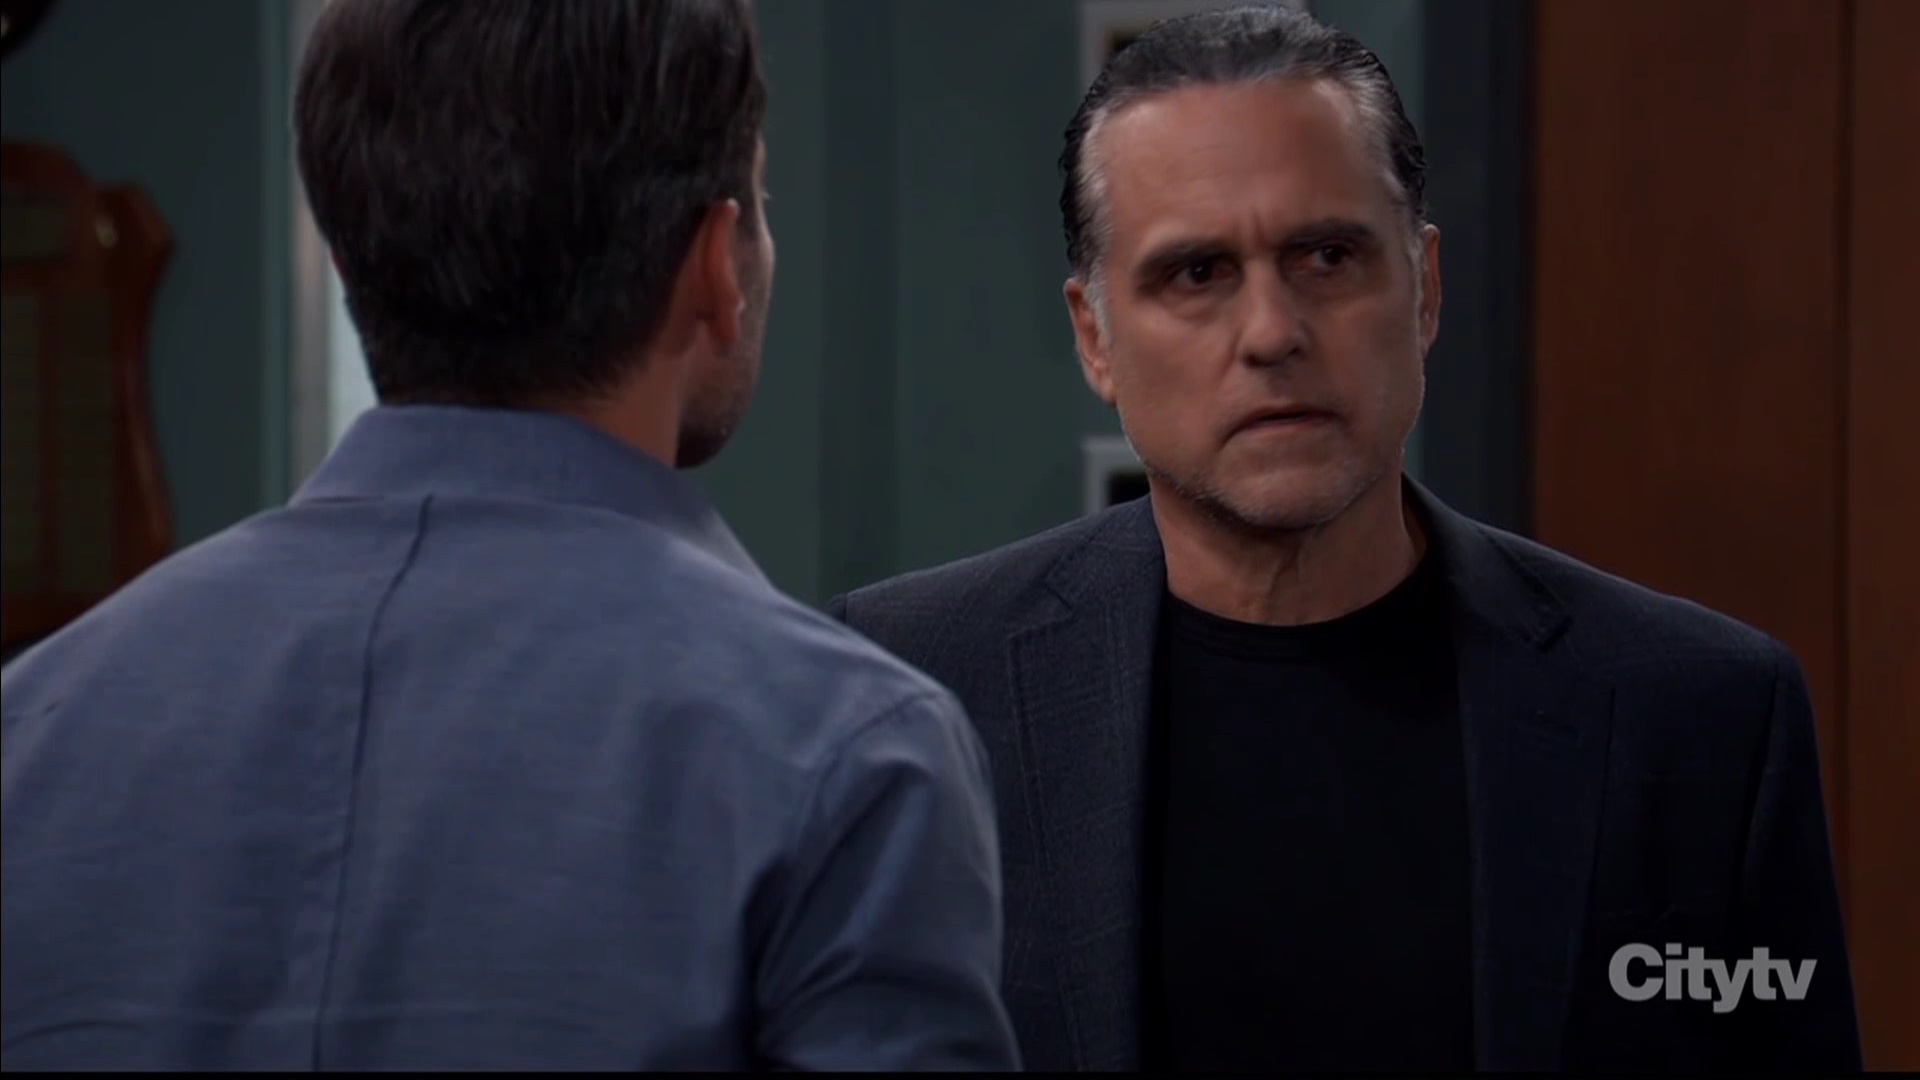 sonny willing to help dante with spencer GH